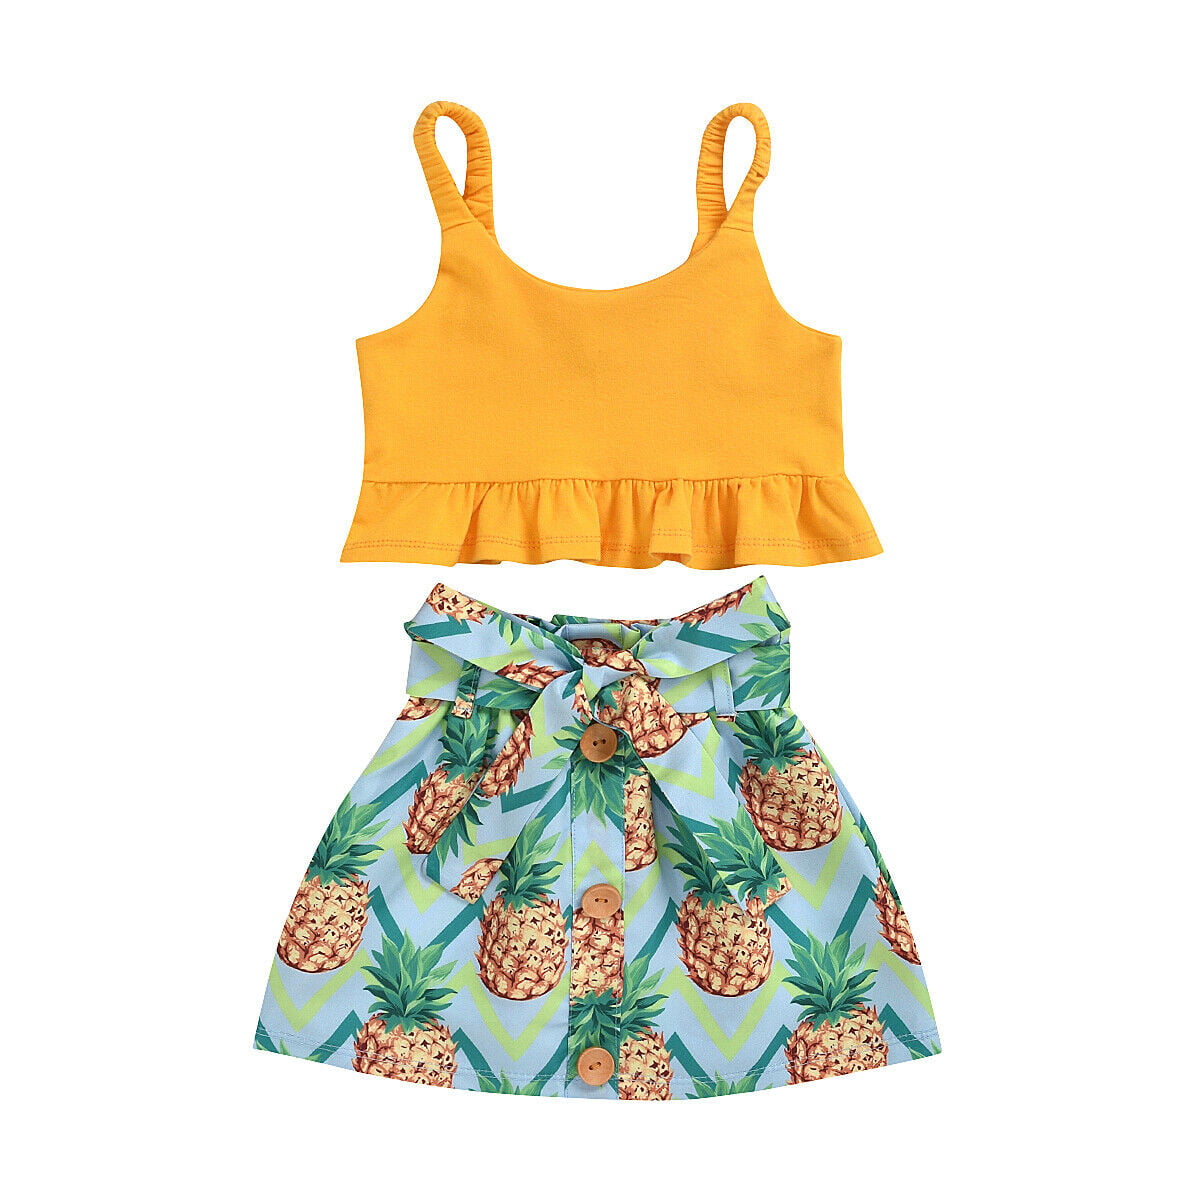 Zerototens Girls Clothes,2-7 Years Old Toddler Kids Summer Outfit Set Sleeveless Pineapple Print Vest Shirt Tops and Loose Short Pants Children Casual Outfit 